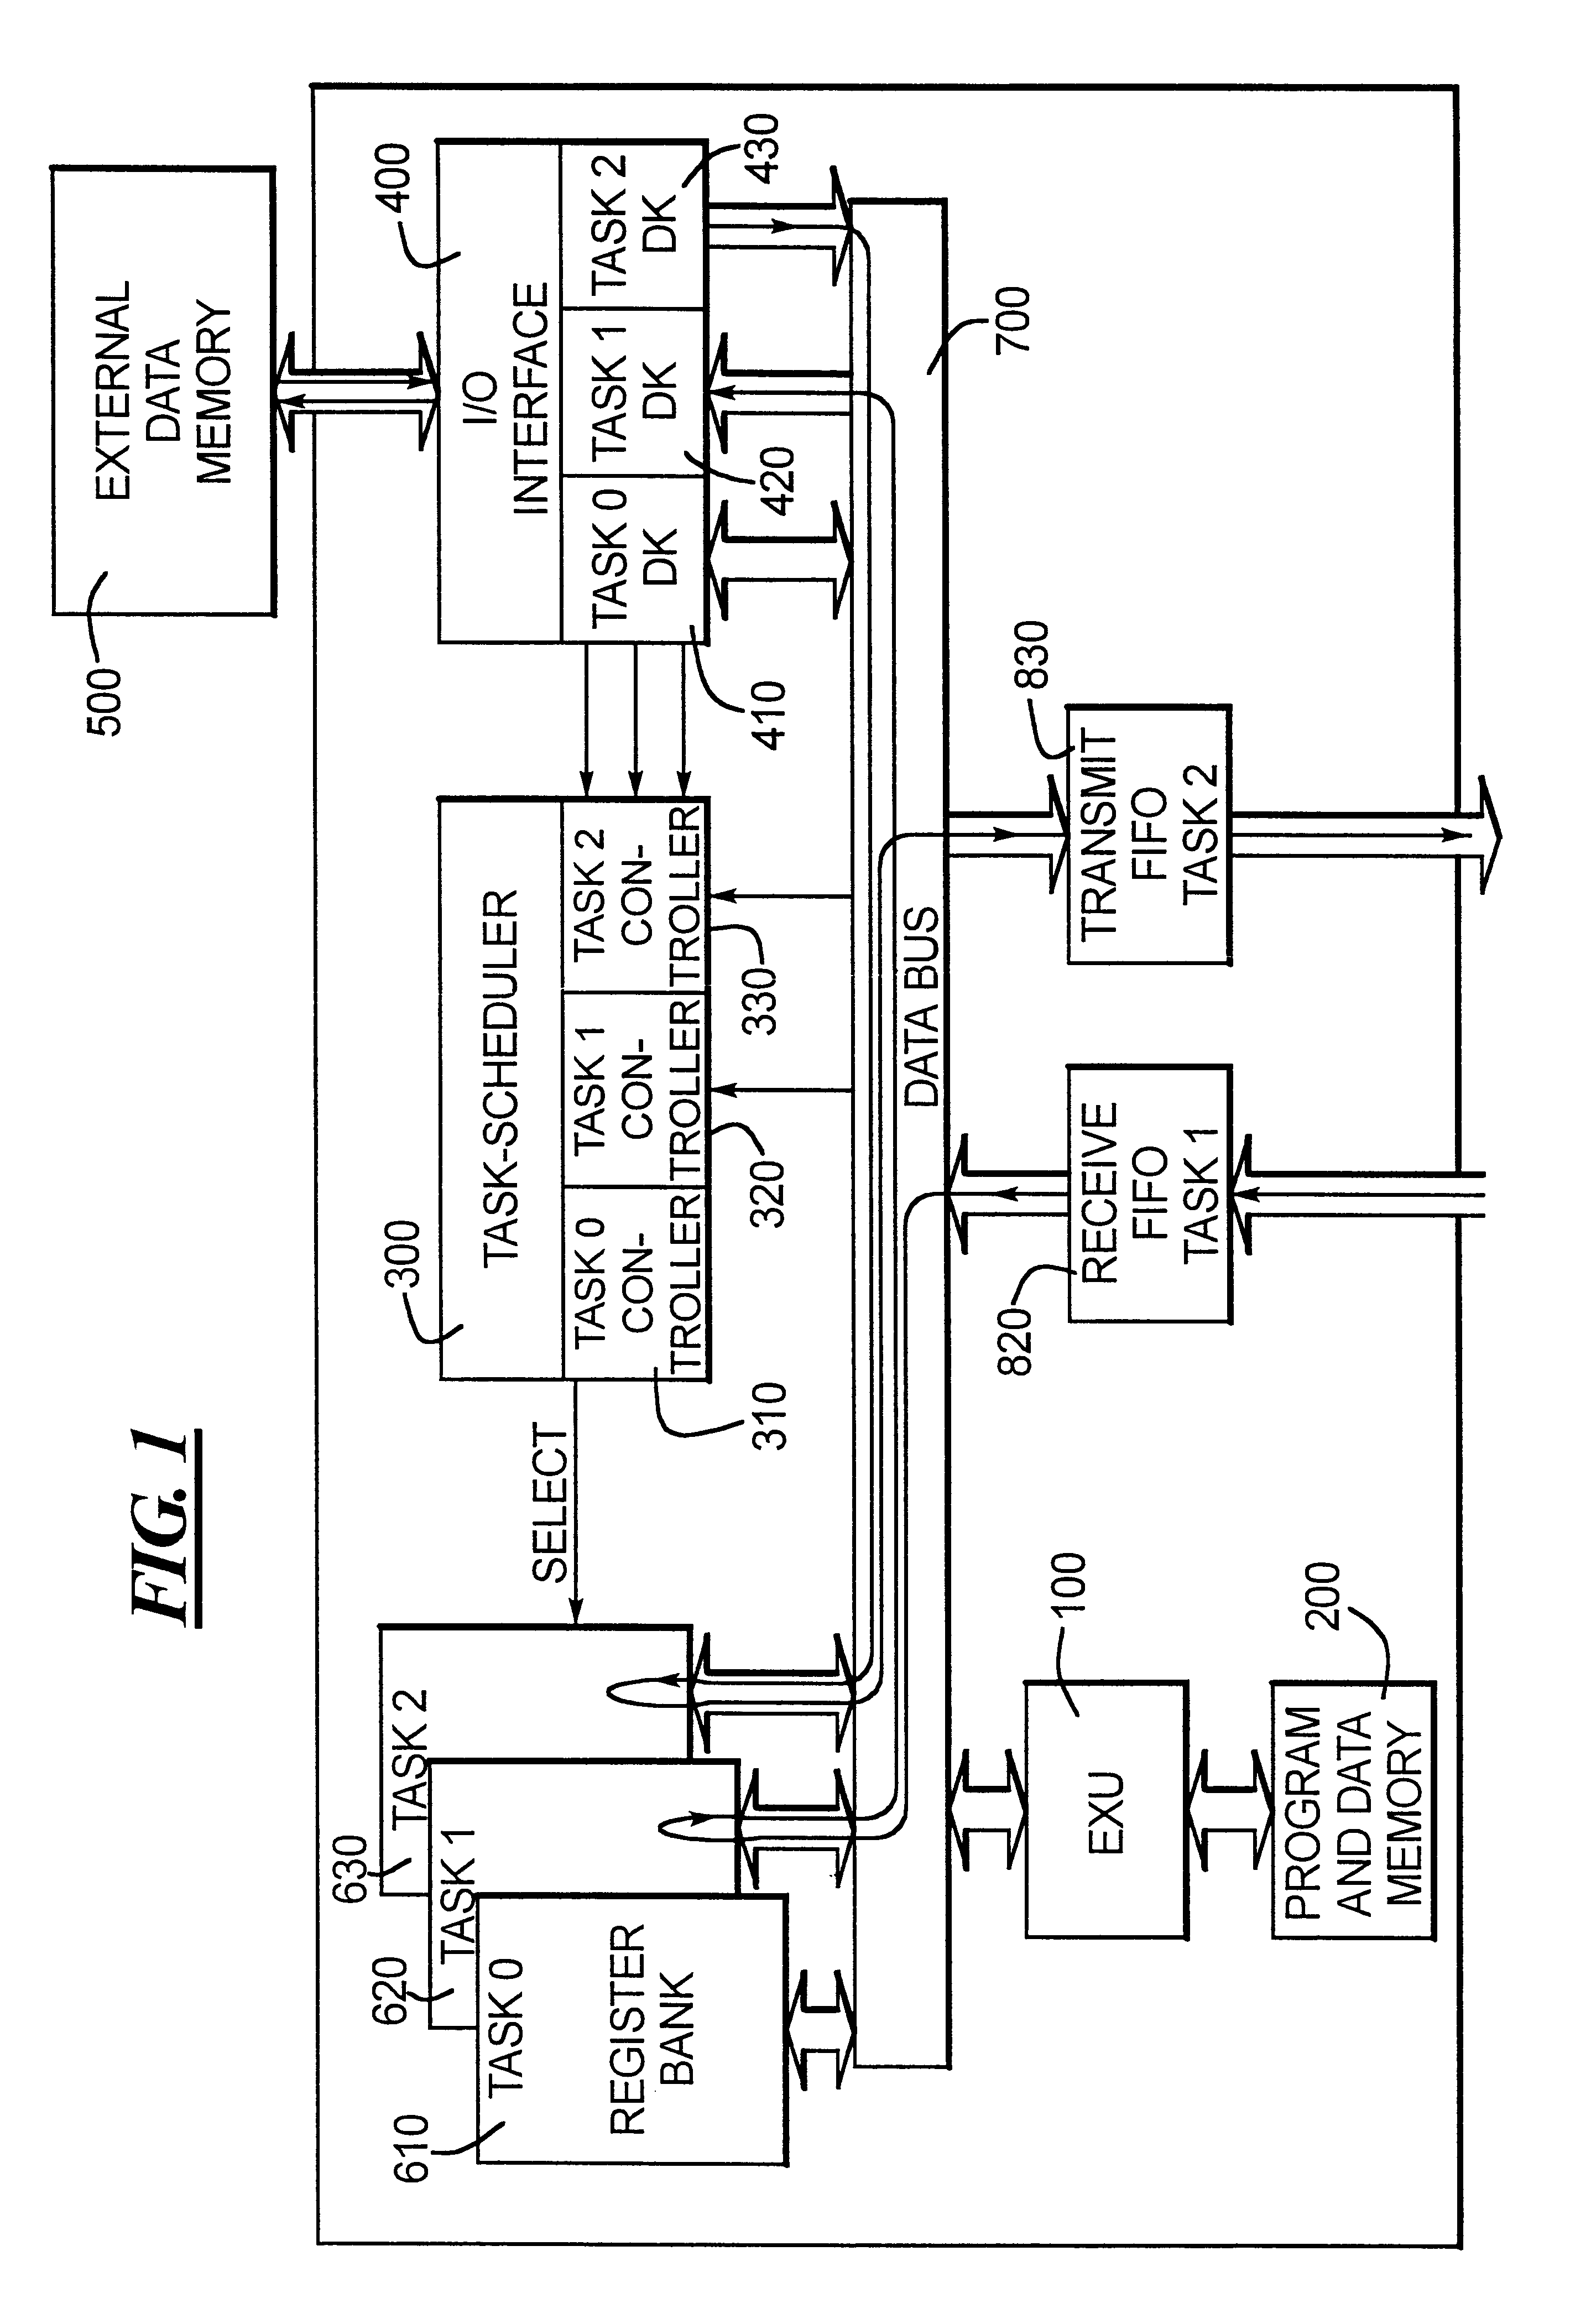 Application-specific integrated circuit for processing defined sequences of assembler instructions